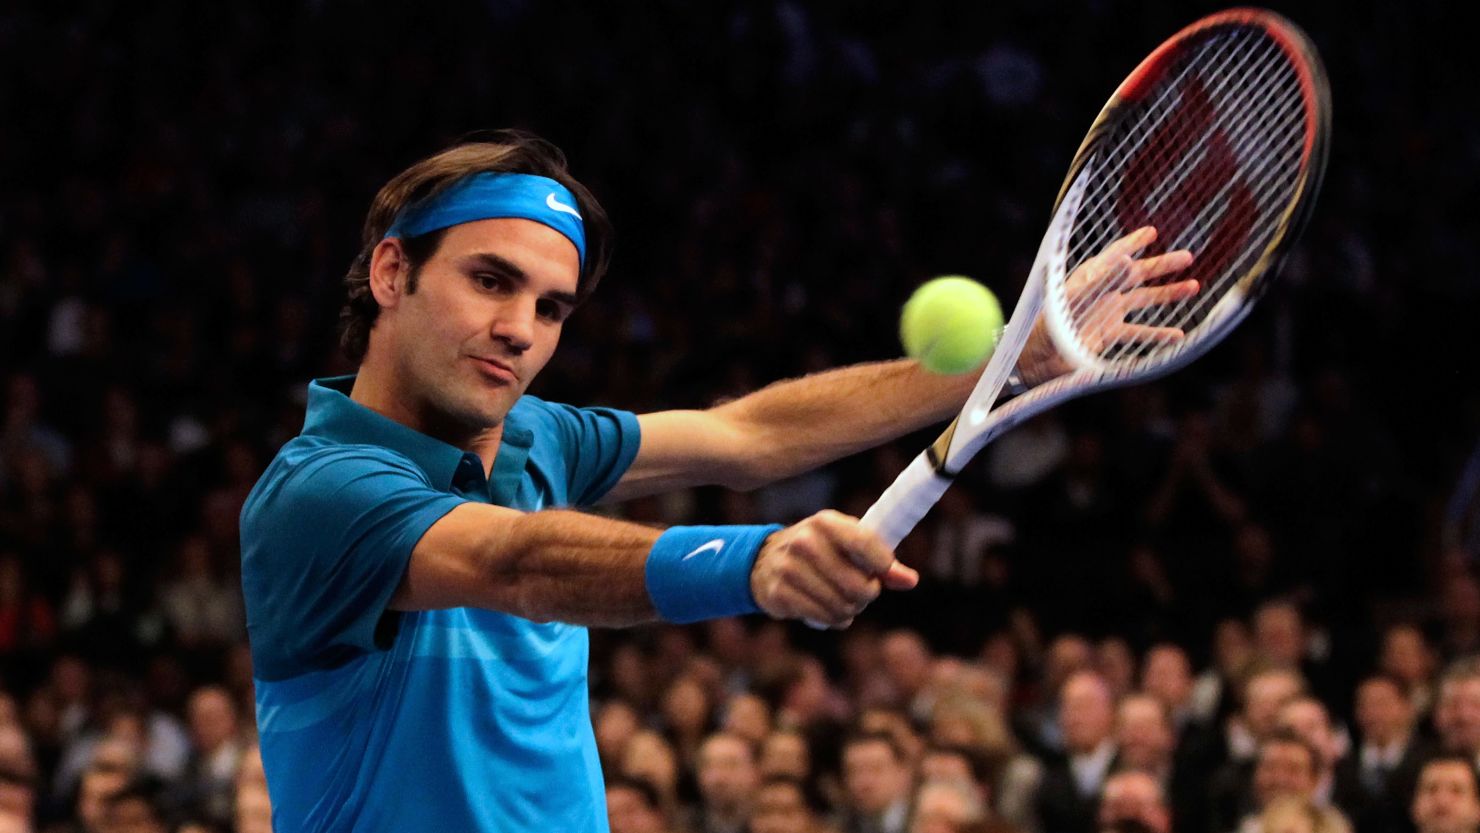 Switzerland's 16-time grand slam winner Roger Federer won the event three years in a row between 2004 and 2006.